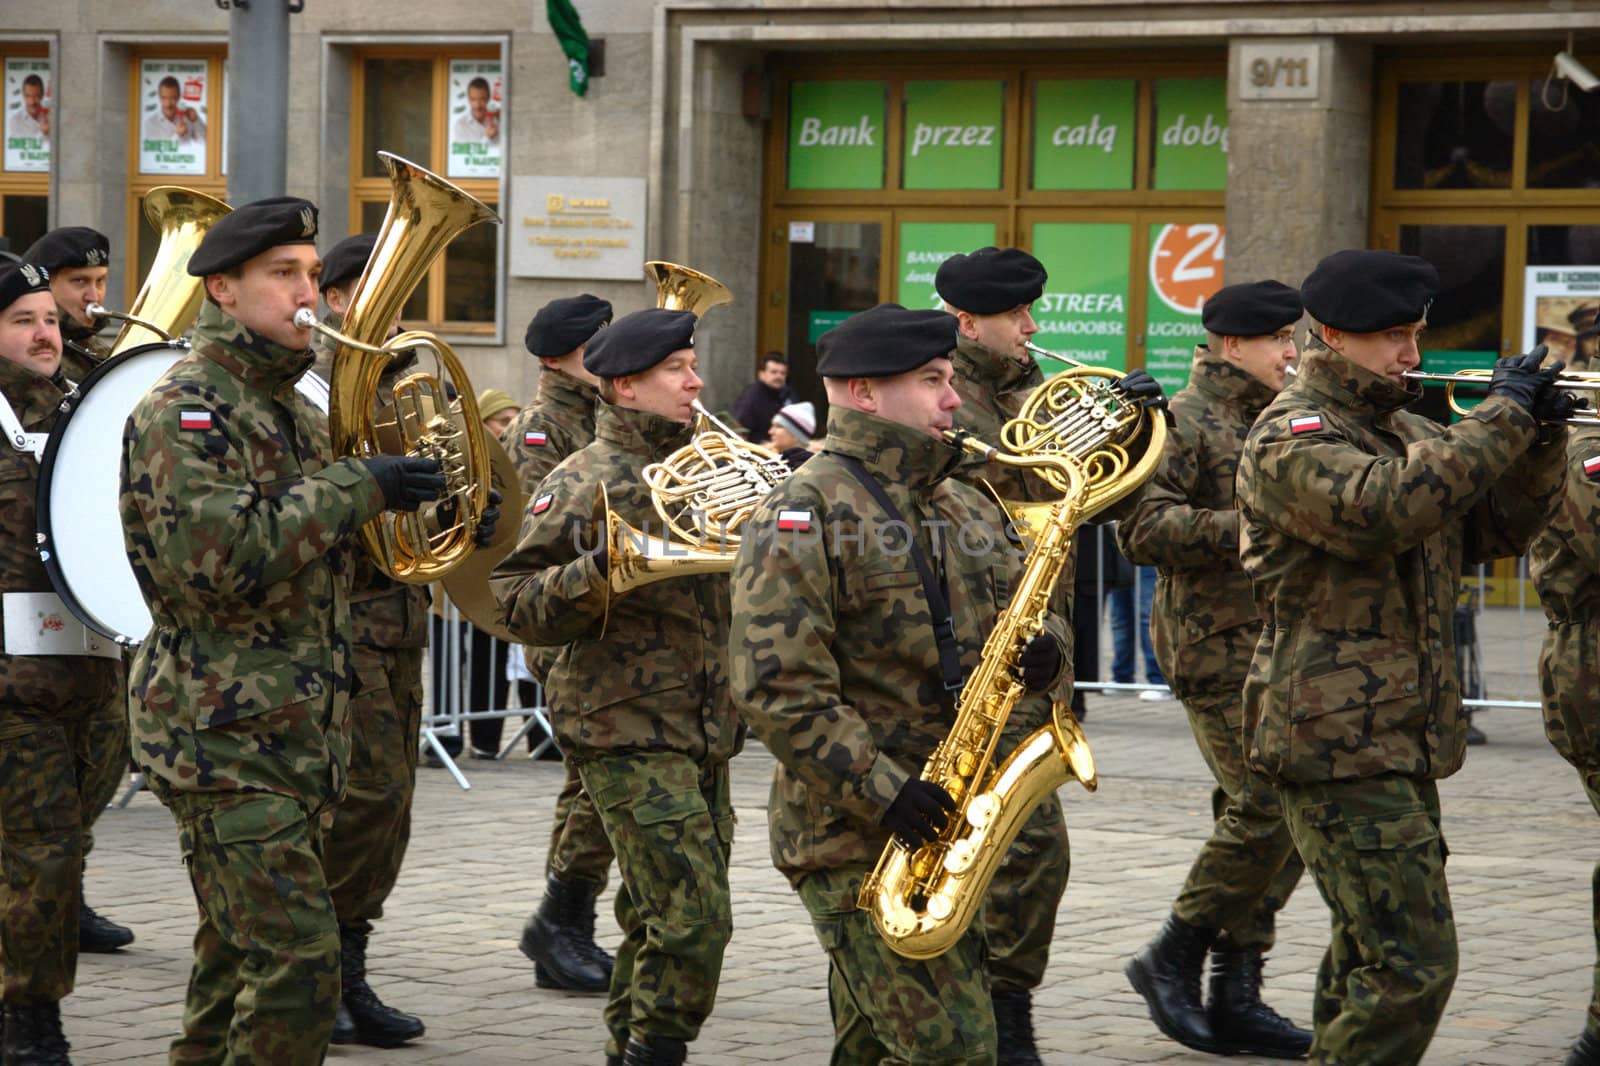 WROCLAW, POLAND - DECEMBER 2: Polish army, engineering training center for troops receives new army banner. Army orchestra joins the parade on December 2, 2011.